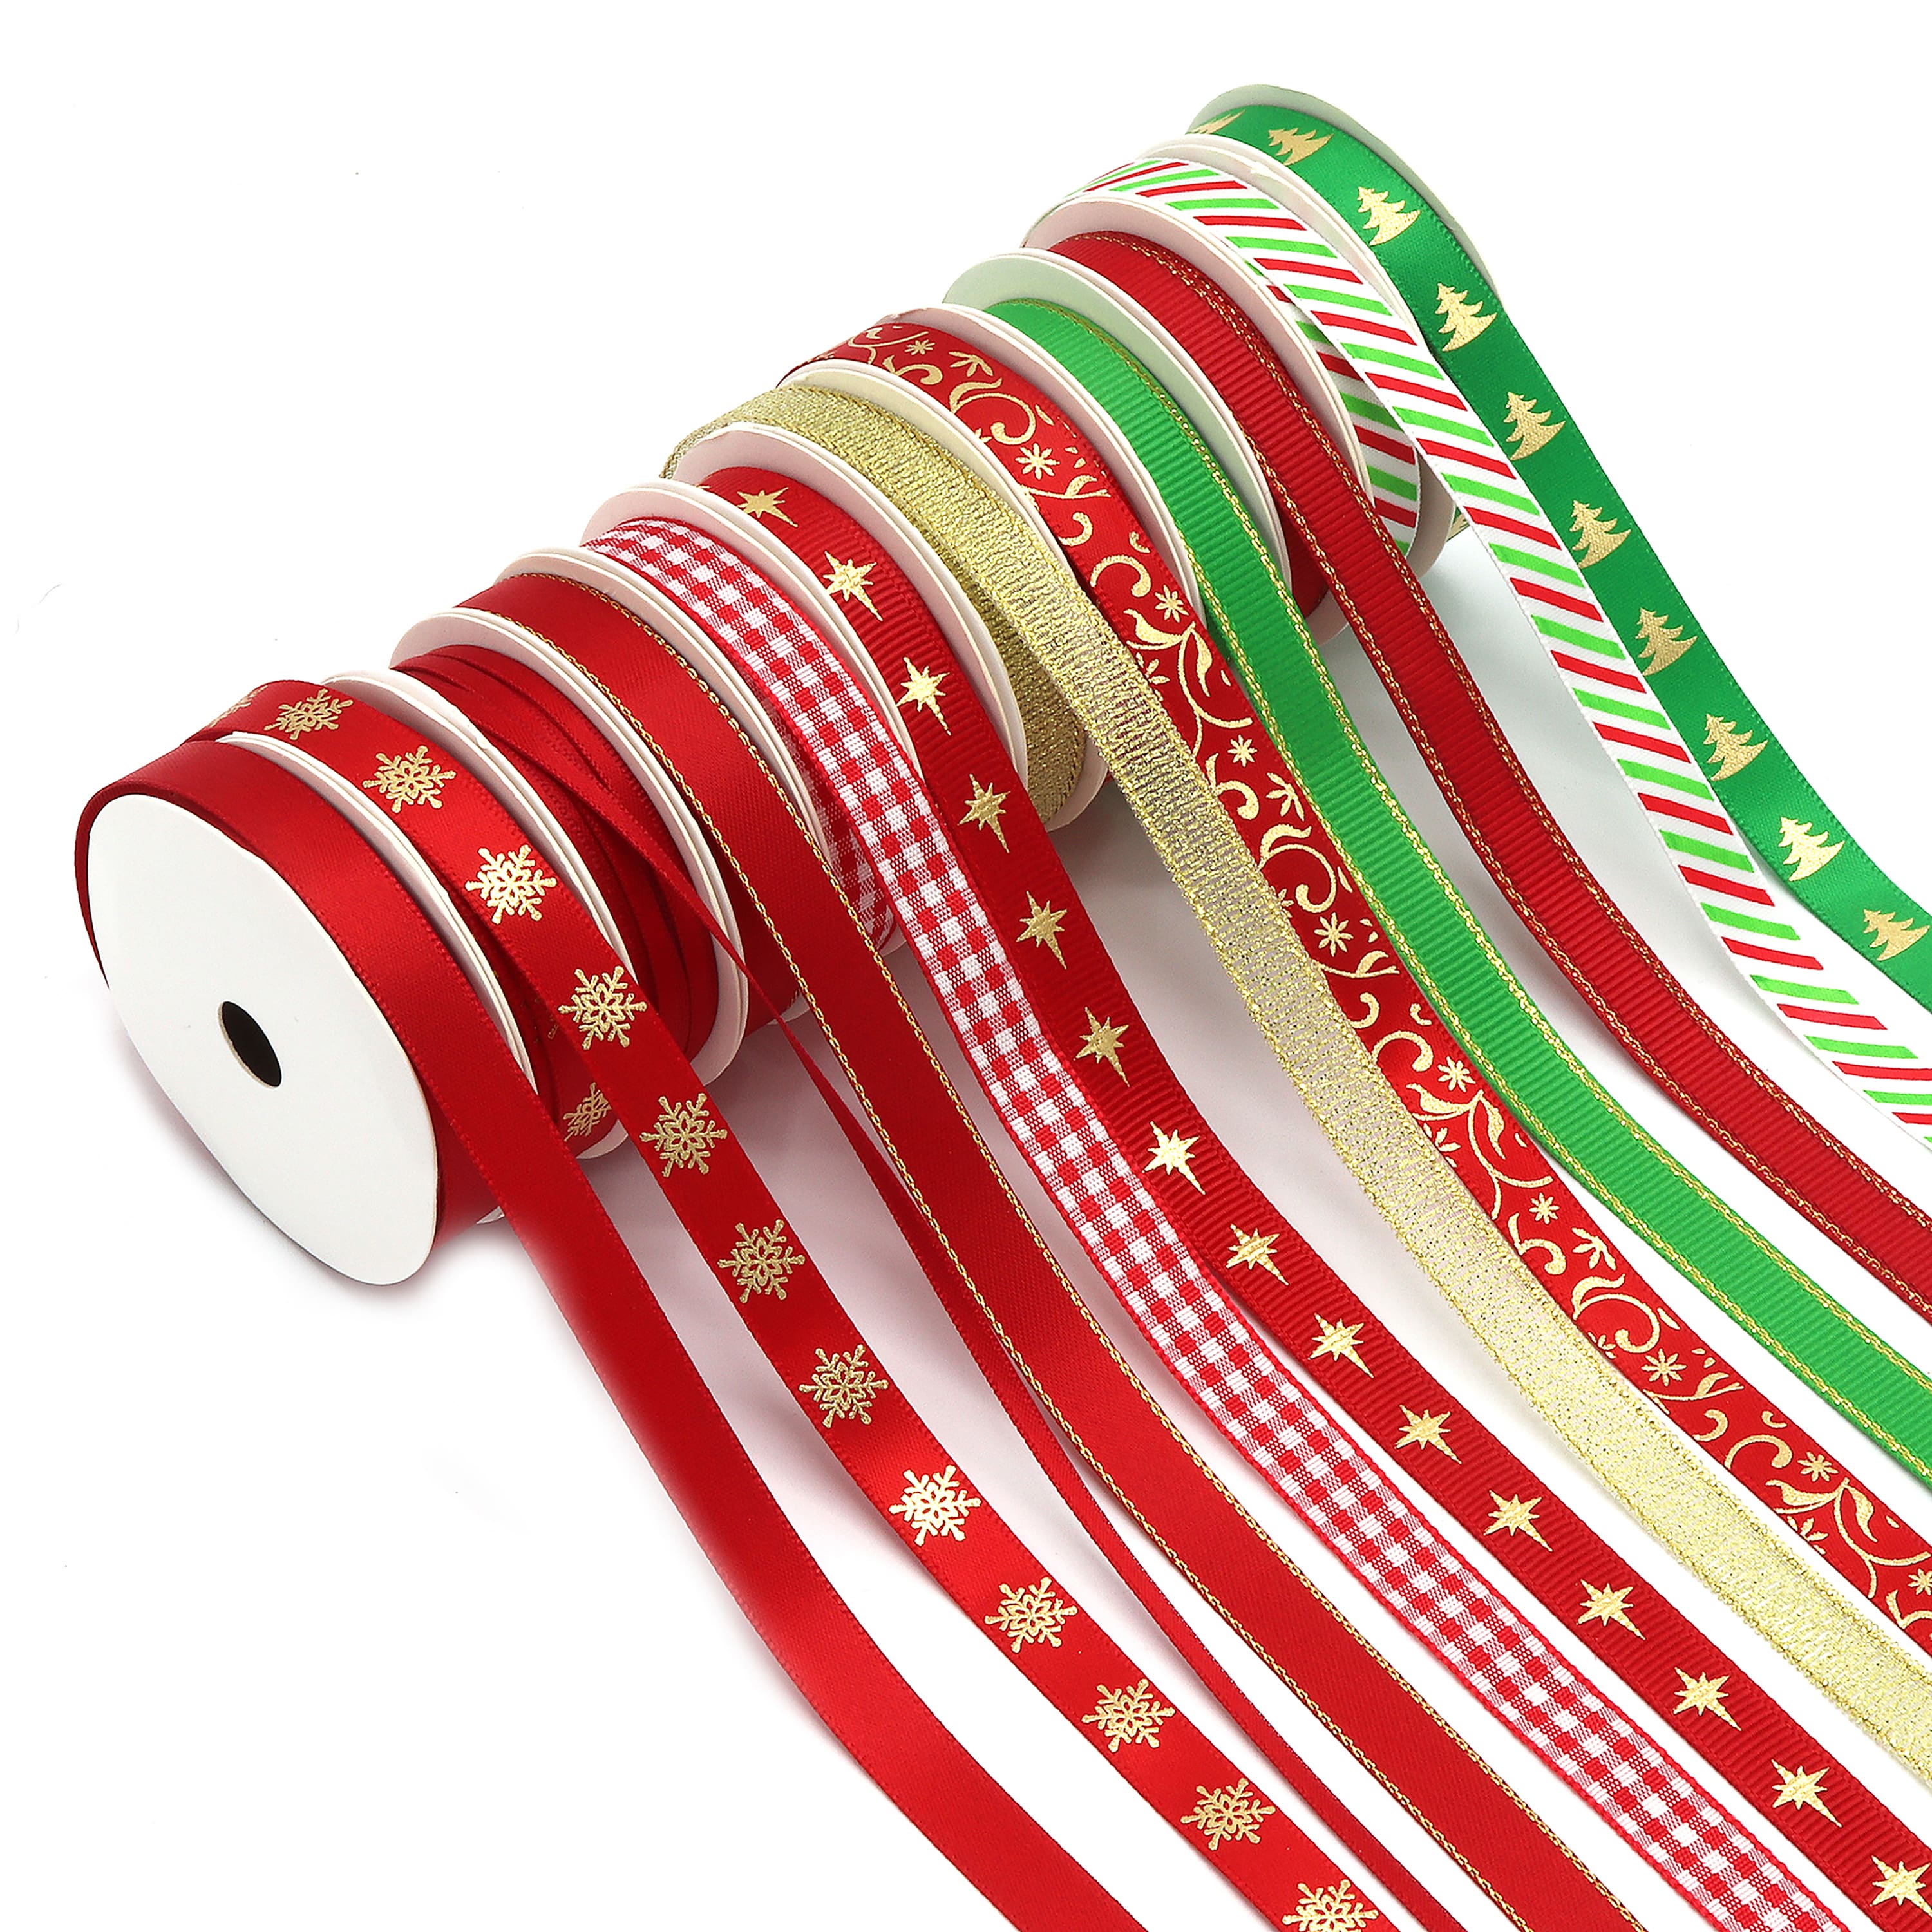 Gwen Studios Assorted Christmas Ribbon Pack for Crafts & Gift Wrap, 12 Spools, 3/8 x 36 Yards